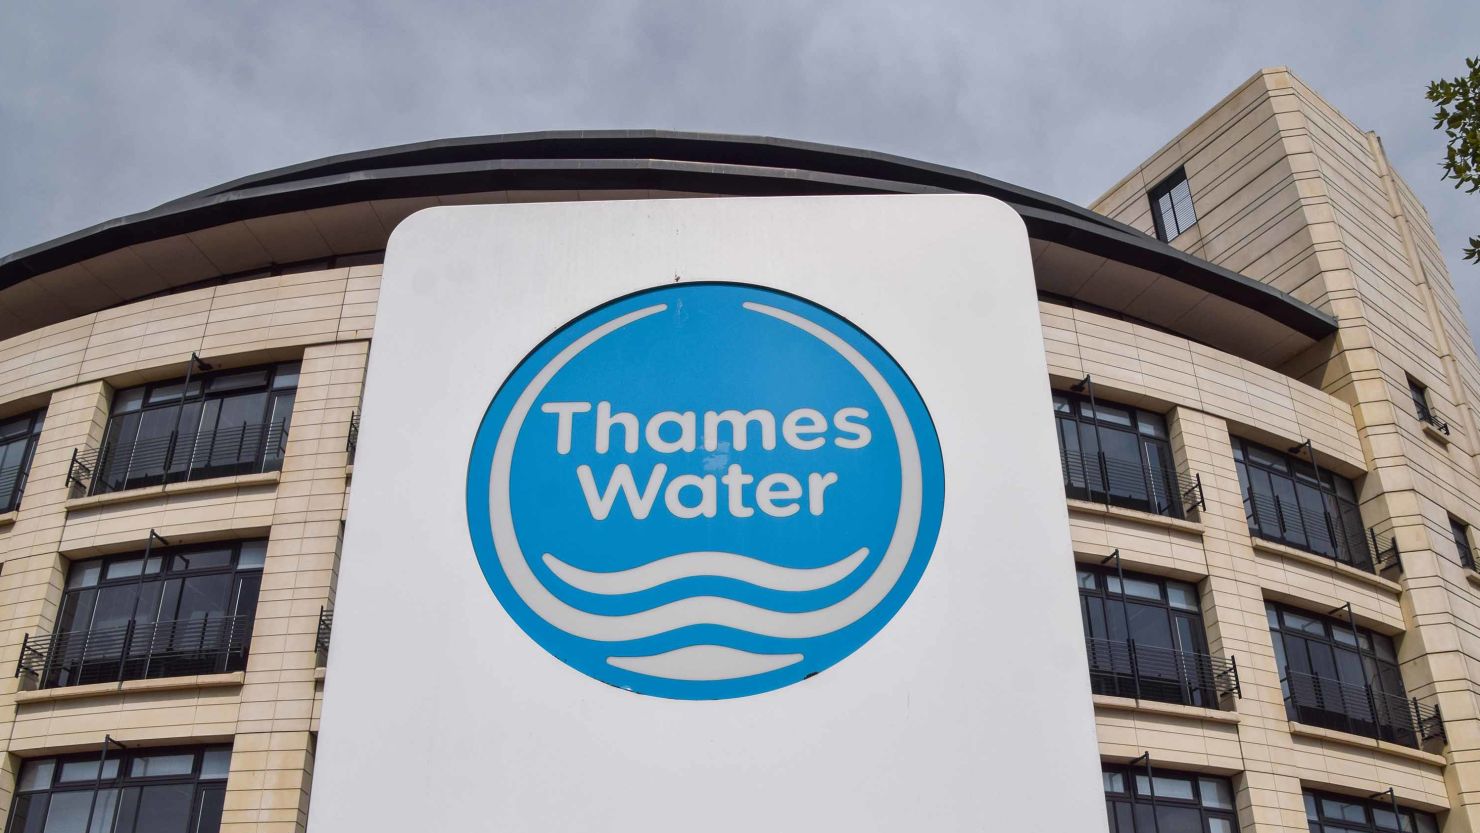 The head office of Thames Water in Reading, UK